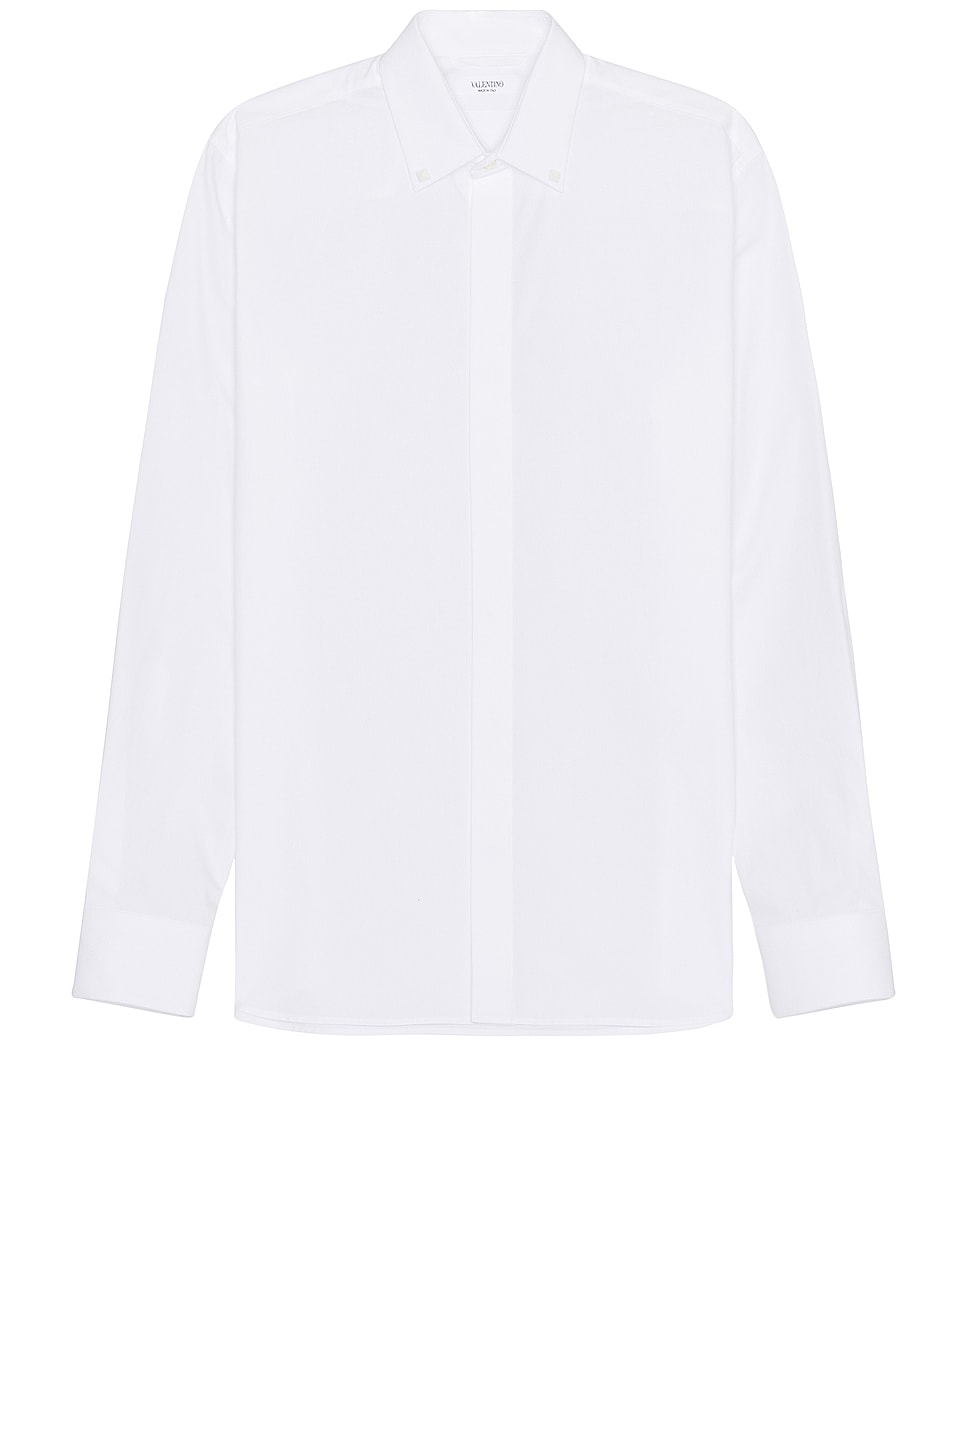 Image 1 of Valentino Rockstud Button Down Shirt in White